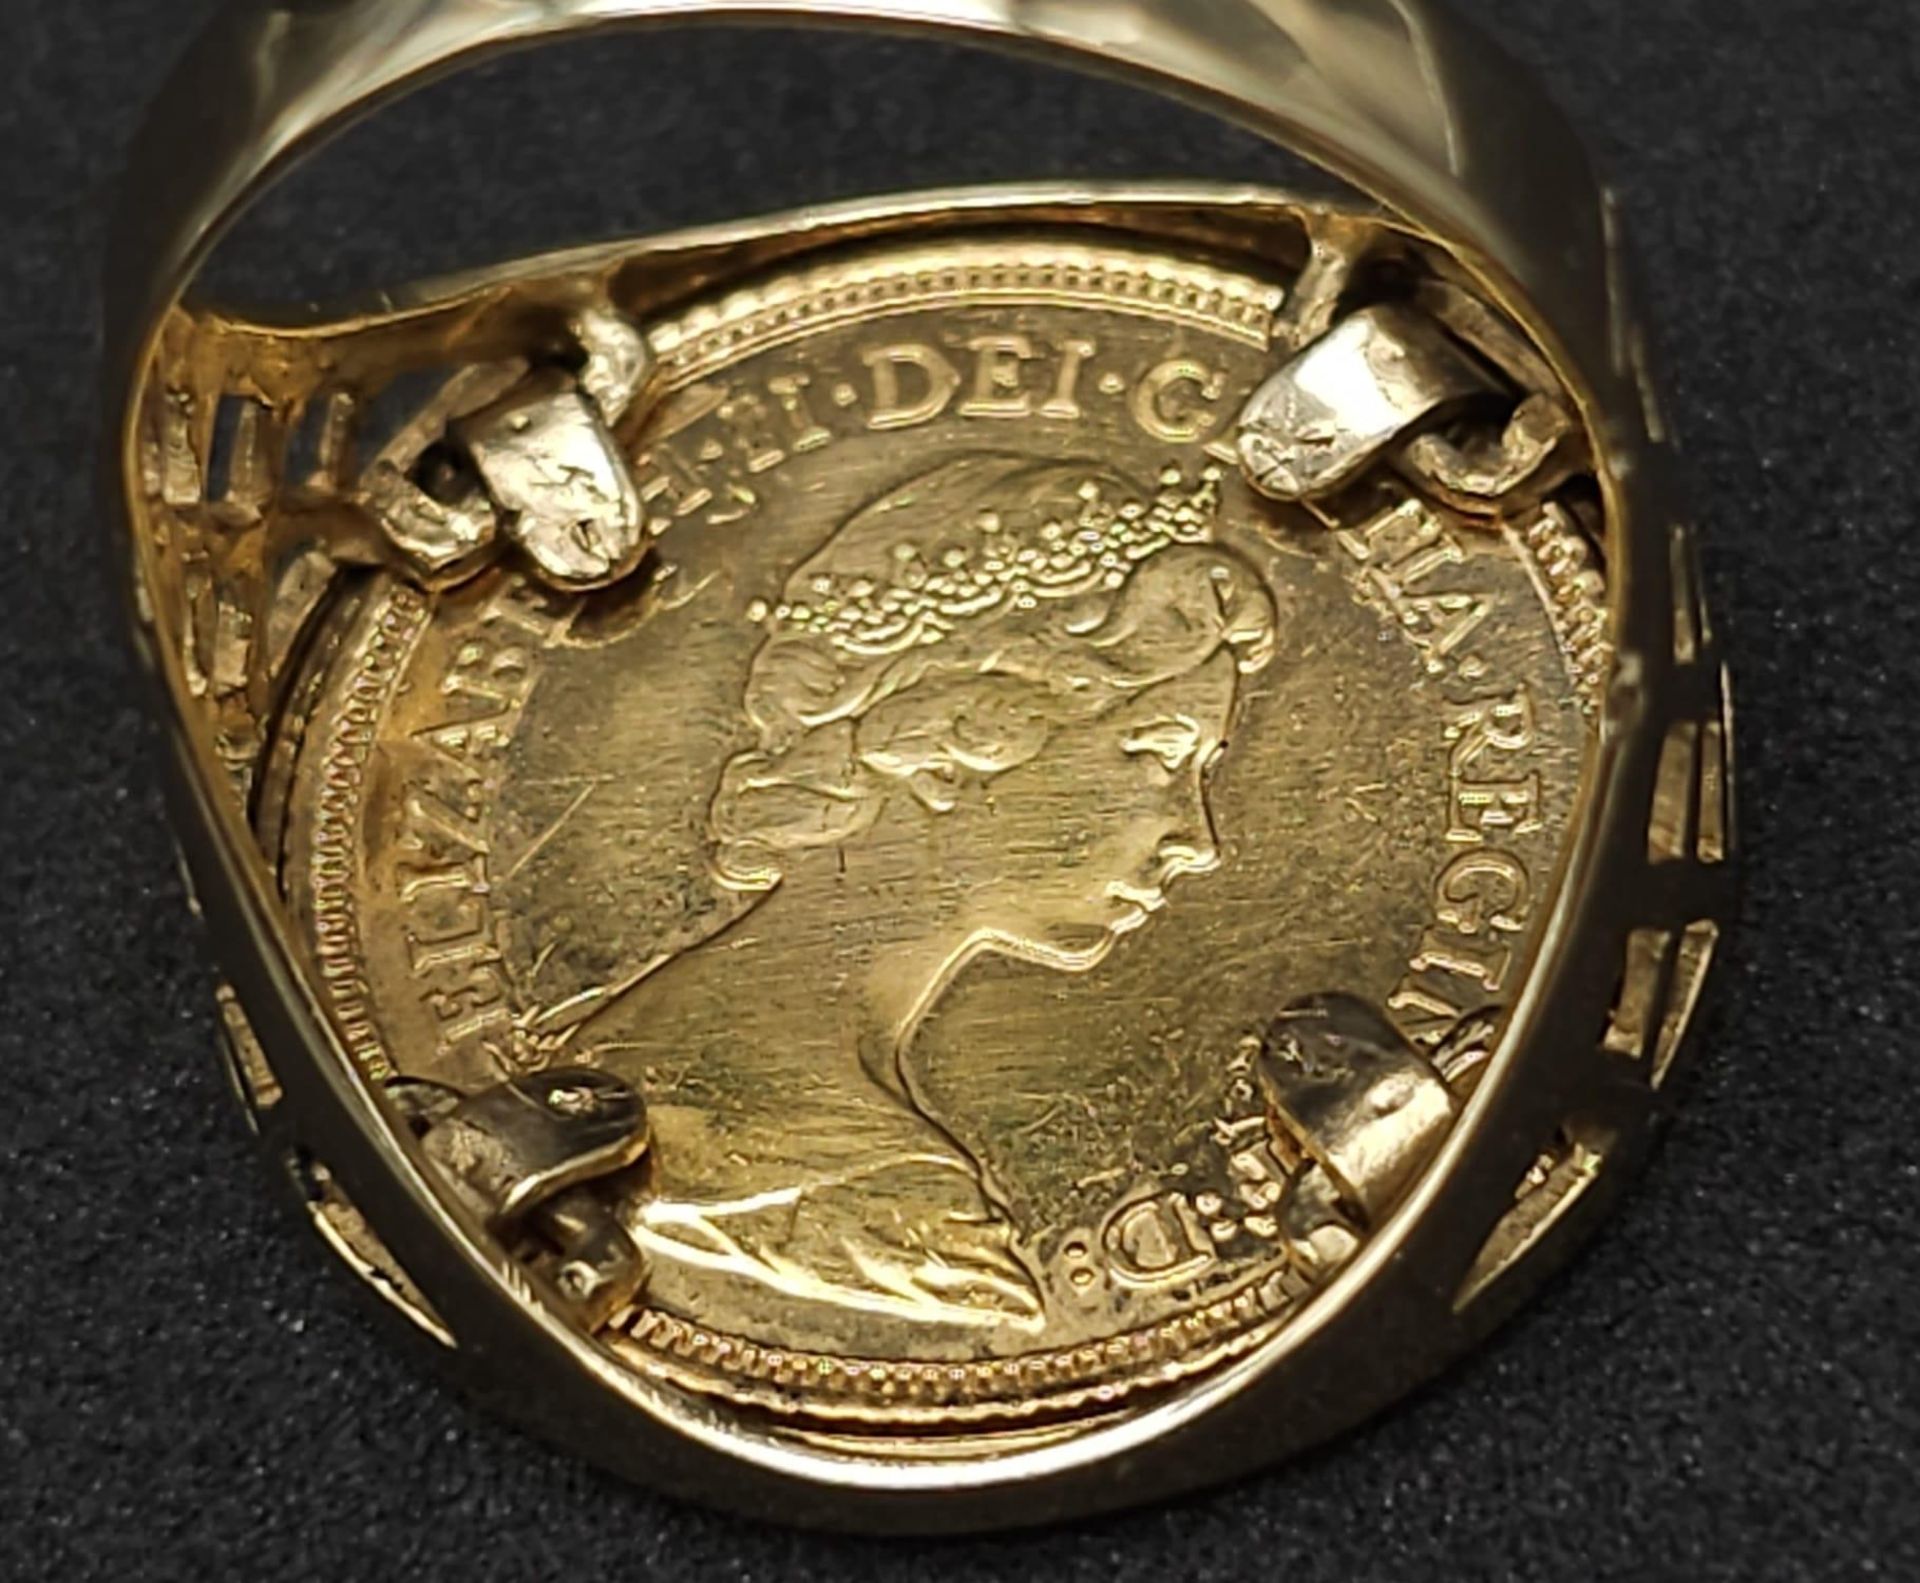 22k yellow gold half sovereign coin, dated 1982 with Queen Elizabeth, set into a 9k yellow gold ring - Bild 7 aus 8